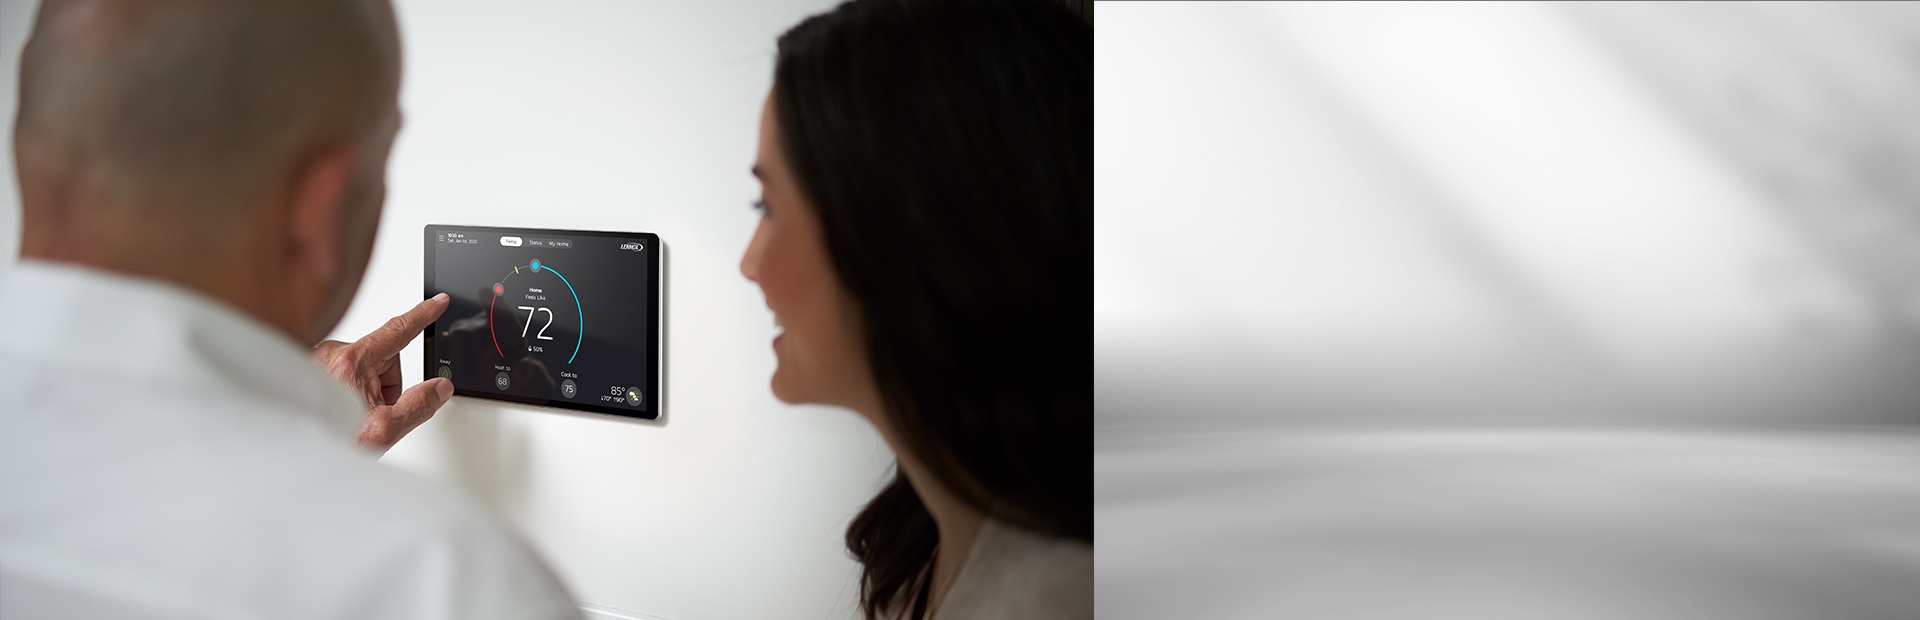 Introducing the new Lennox S40 Smart Thermostat and Accessories Bundle: